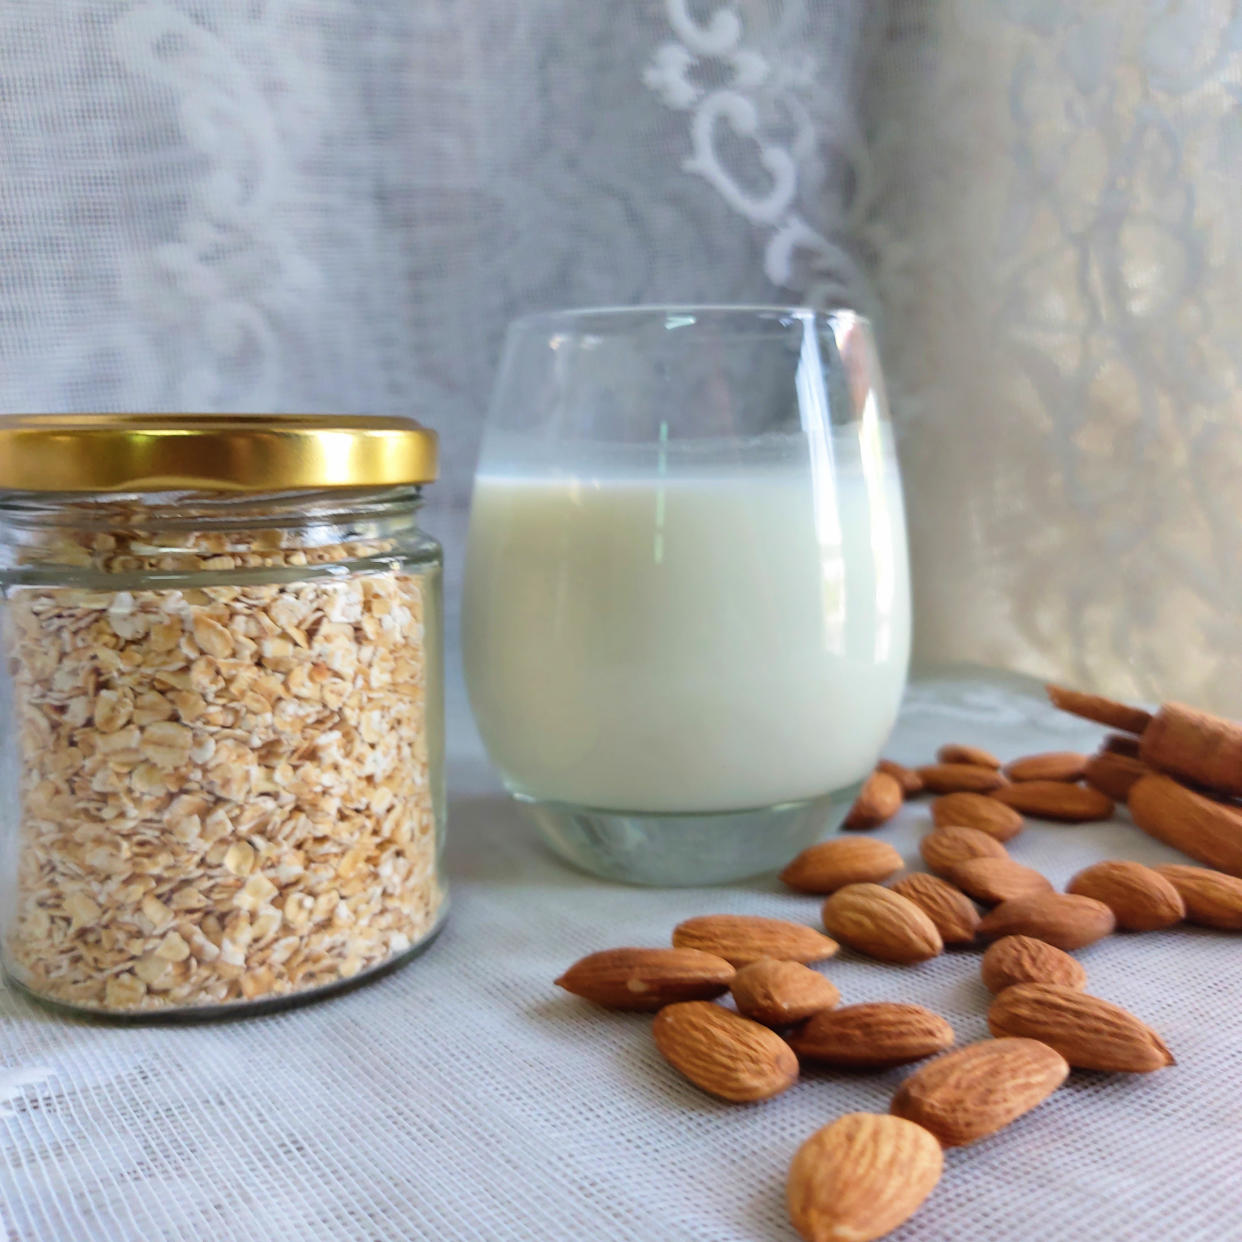 Oats, almonds and milk. (Getty Images)